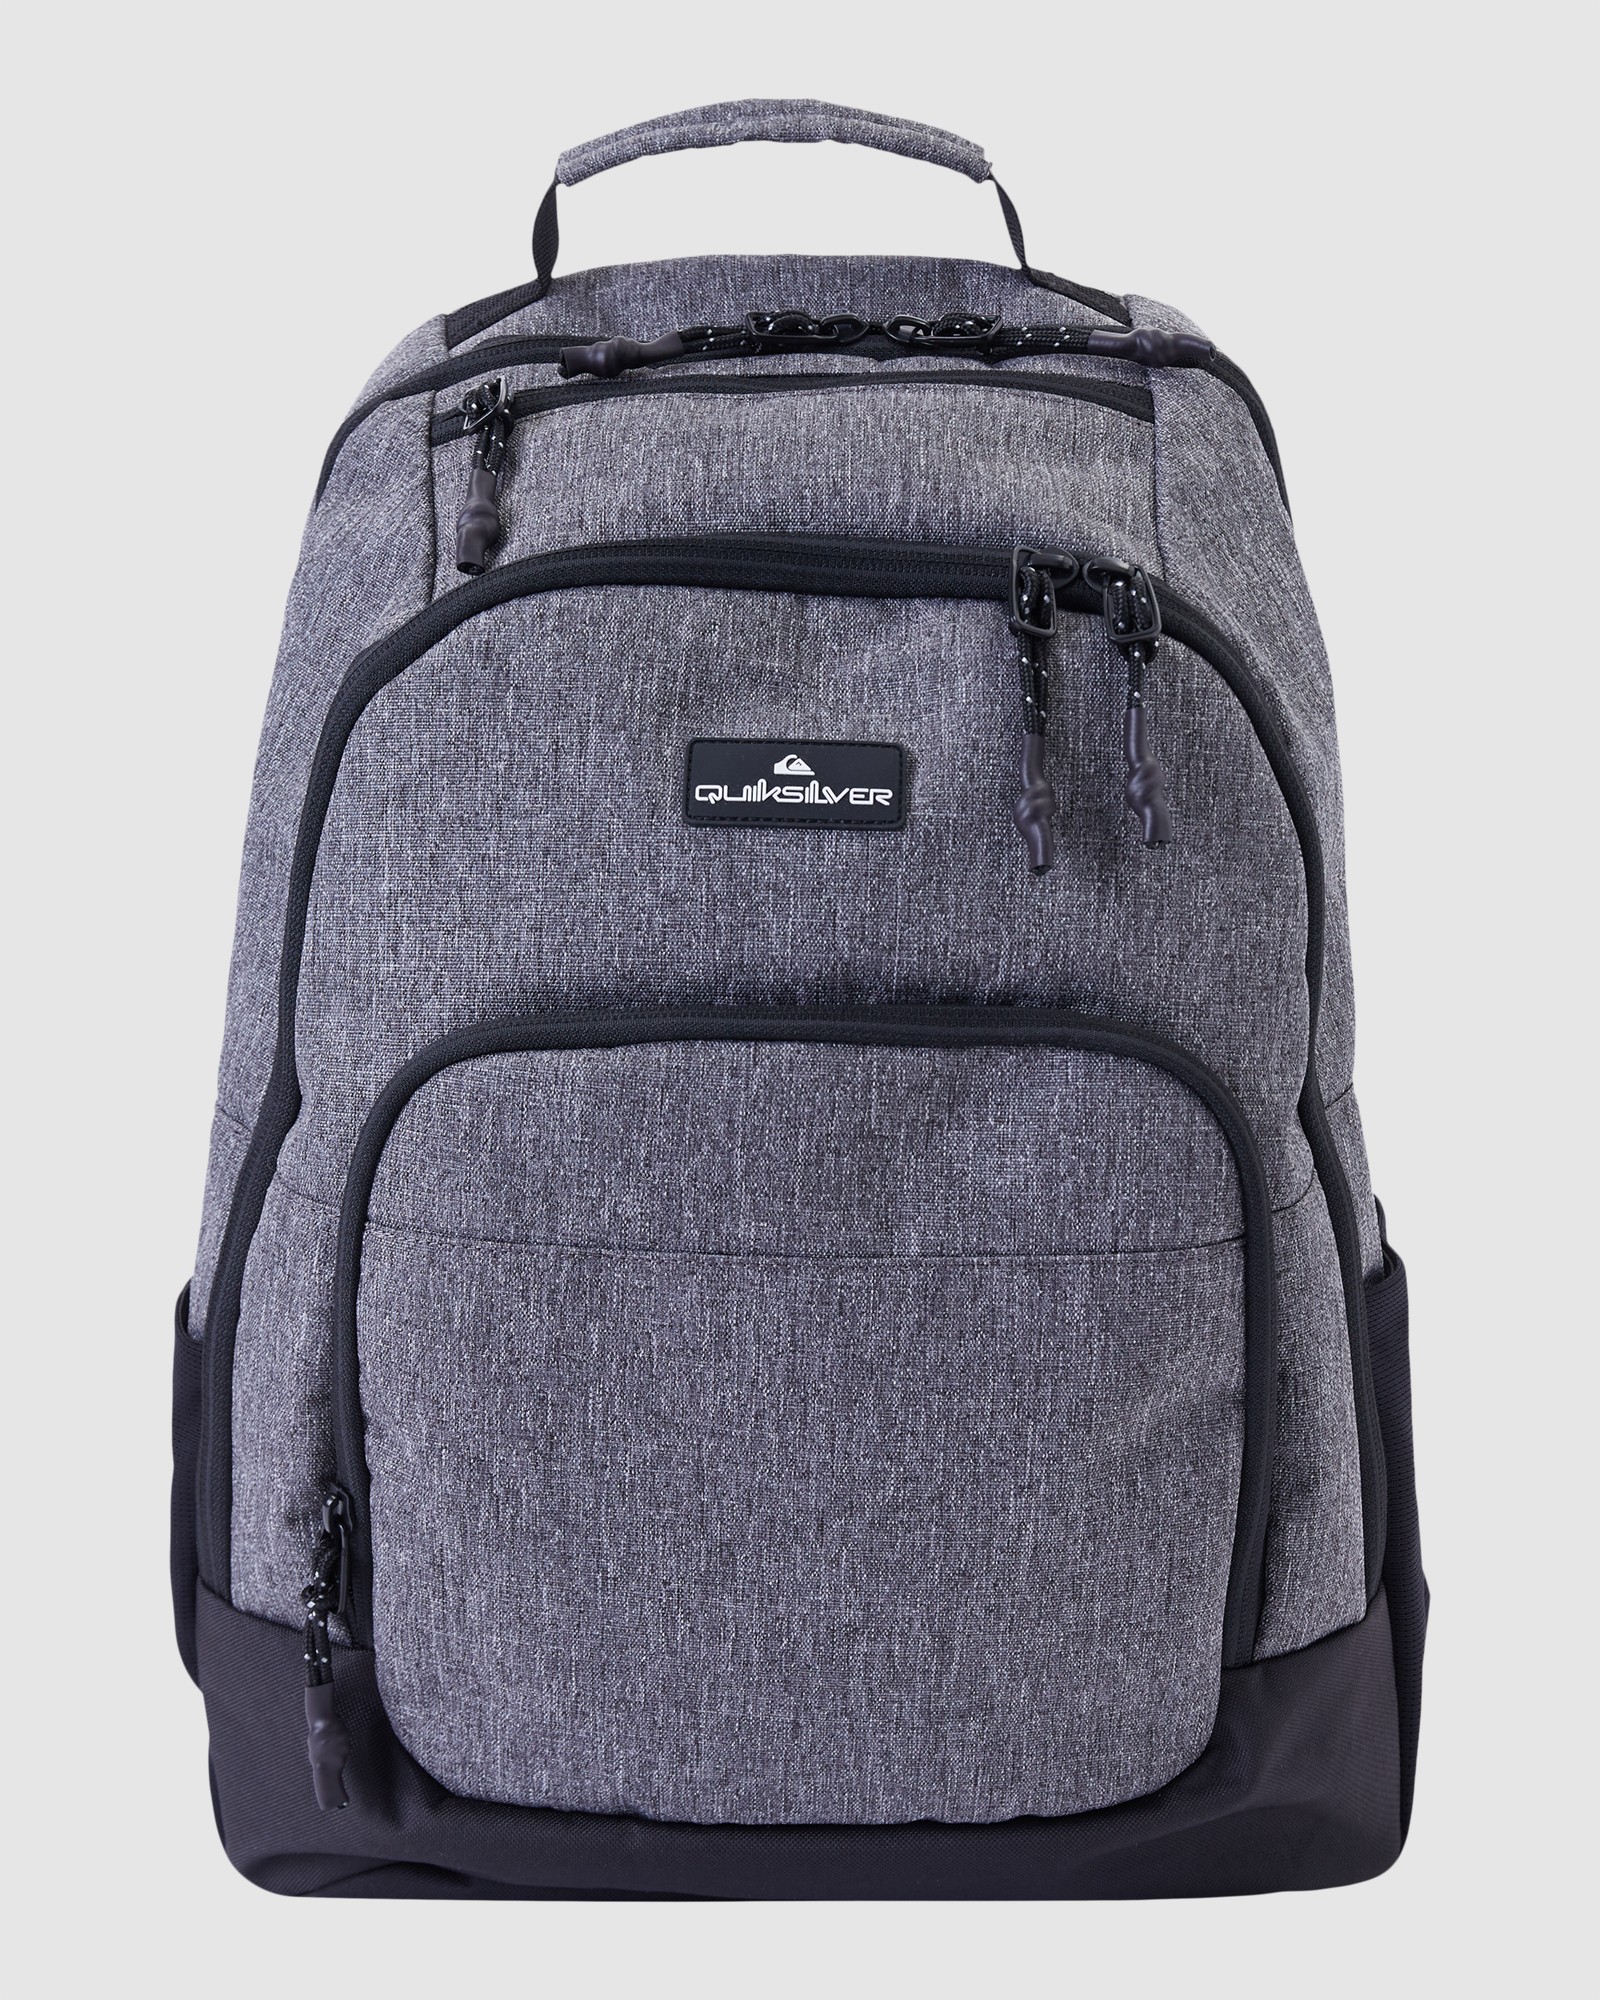 Quiksilver 1969 Special Backpack - Heritage Heather | SurfStitch